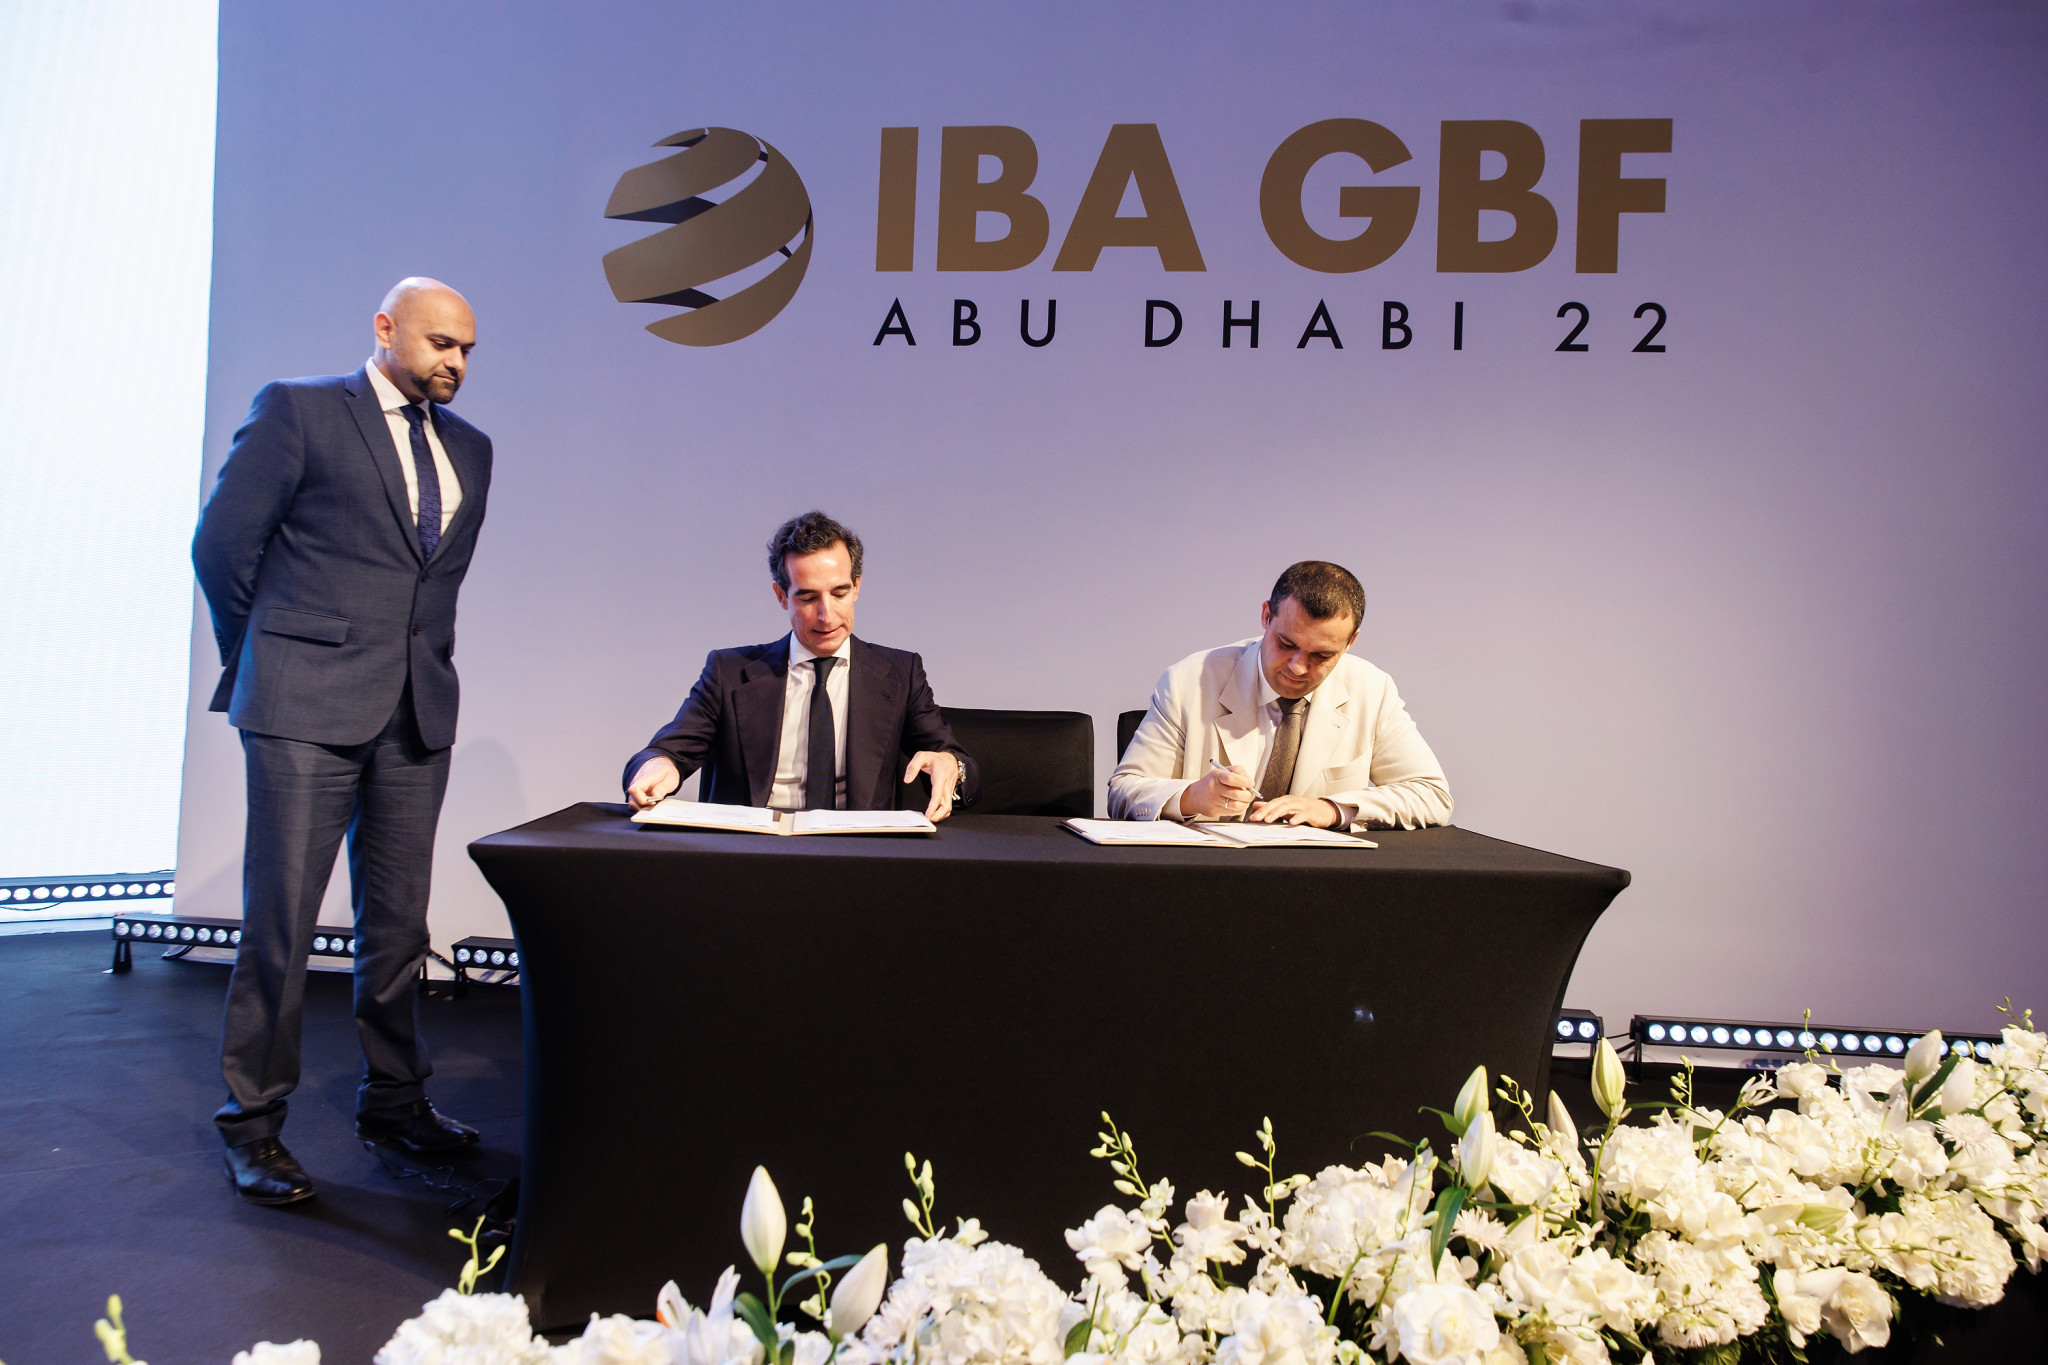 The opening day of the Global Boxing Forum saw IBA President Kremlev sign a Memorandum of Understanding with the Higher Institute of Law and Economics ©IBA